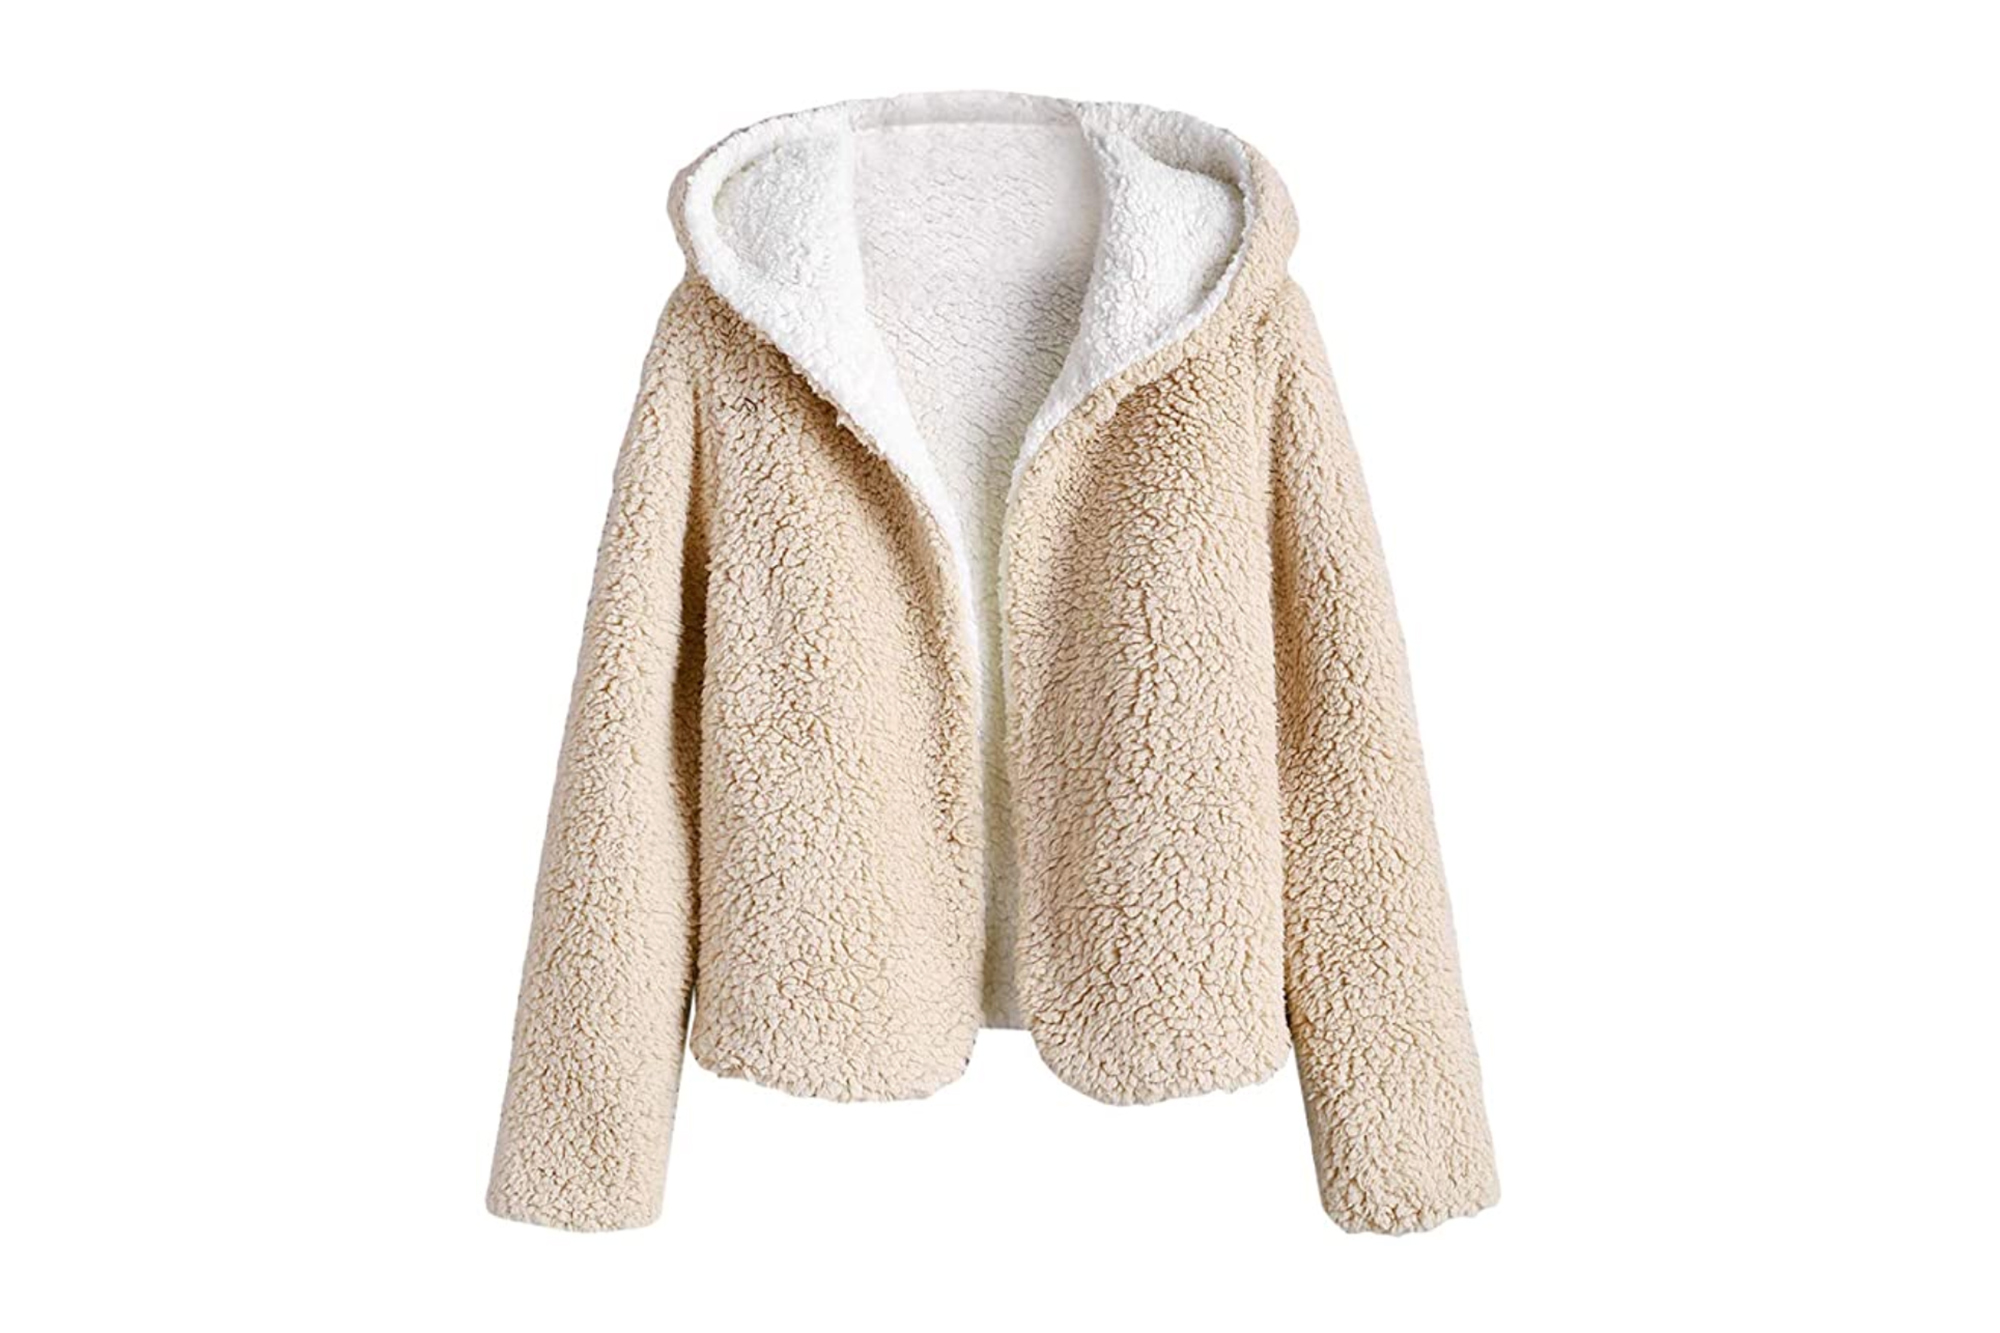 Zaful Reversible Sherpa Coat Gets You 2 Jackets in 1 | Us Weekly